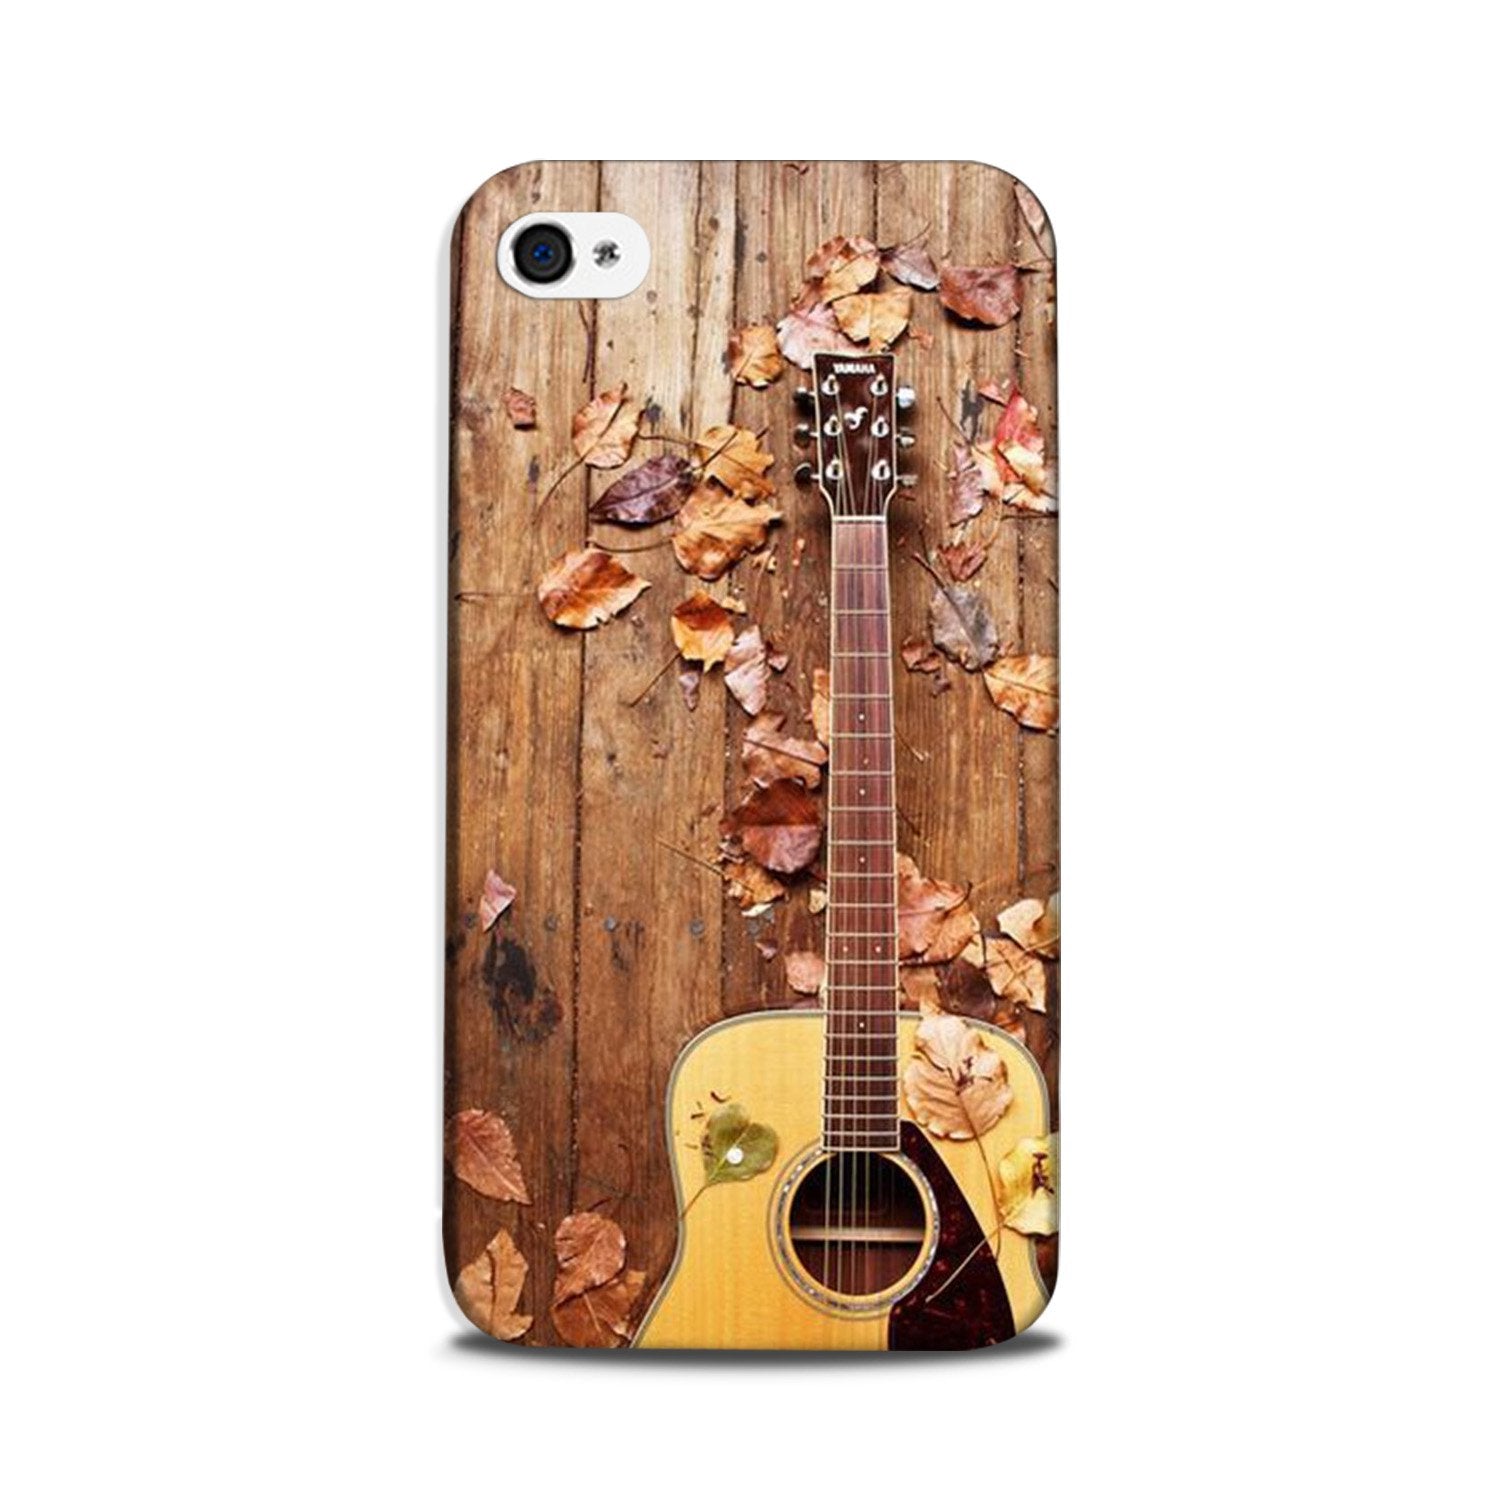 Guitar Case for iPhone 5/ 5s